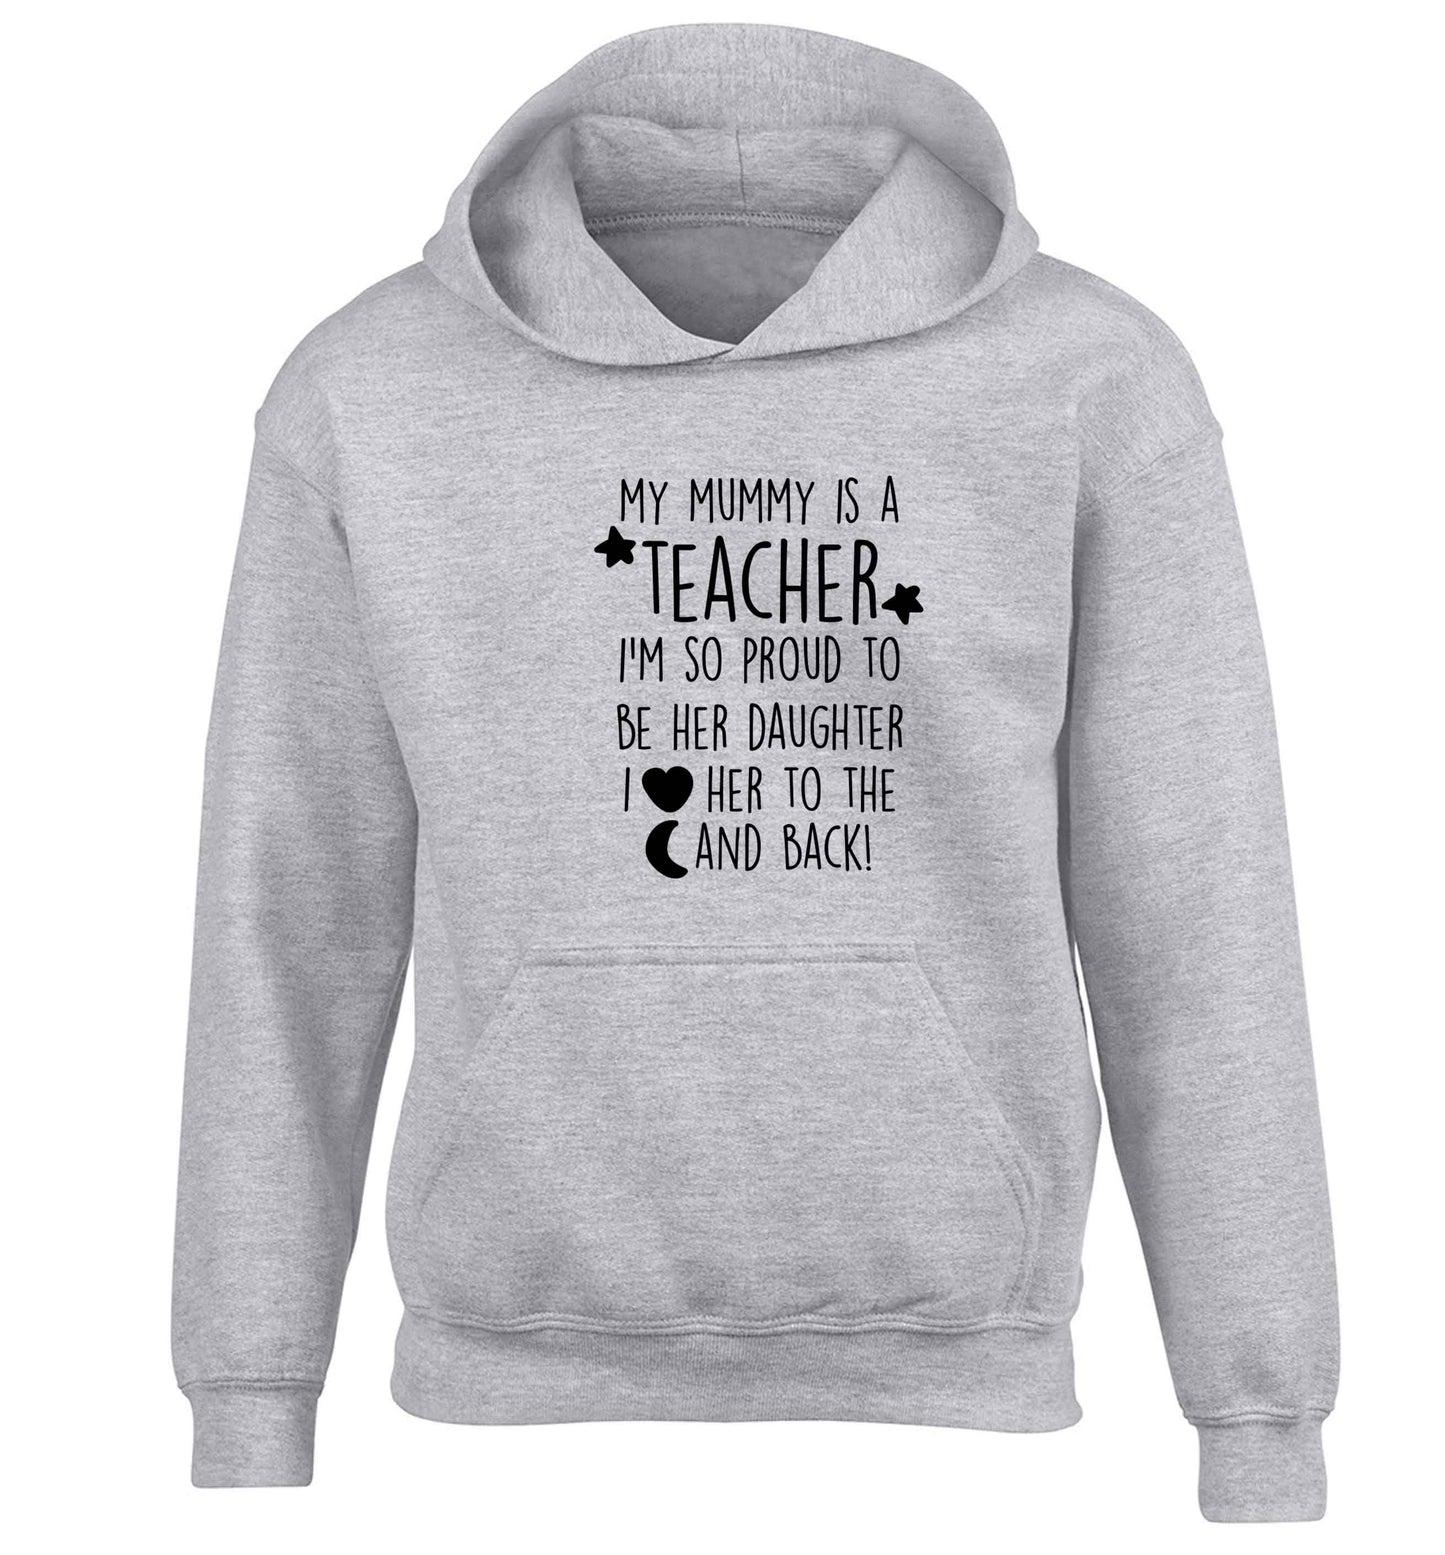 My mummy is a teacher I'm so proud to be her daughter I love her to the moon and back children's grey hoodie 12-13 Years